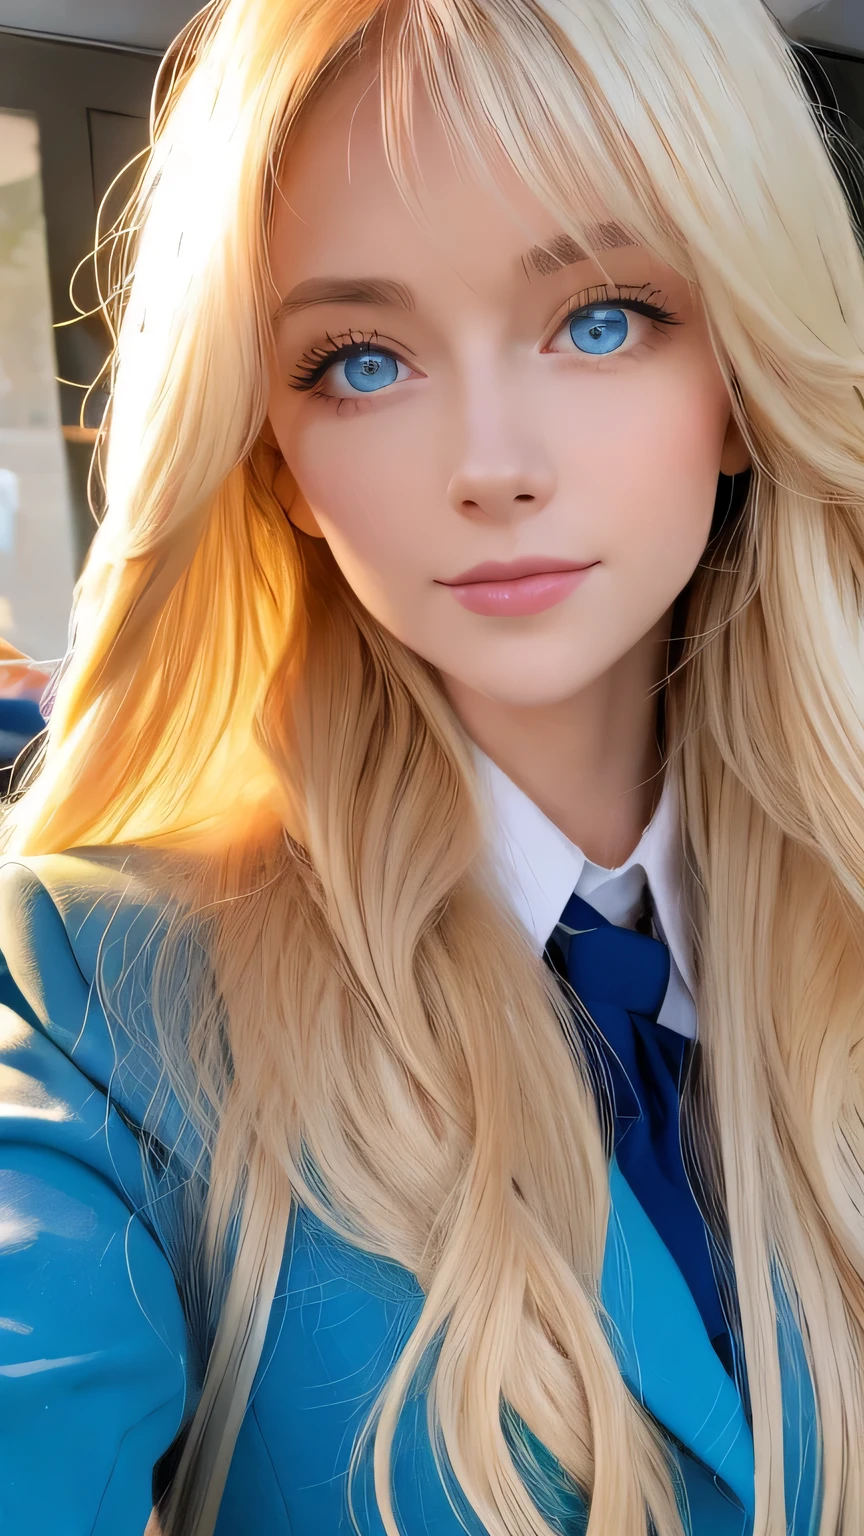 Beautiful girl in uniform、A very pretty 17 year old with super long blonde hair、Super long beautiful blonde hair、Beautiful long bangs、Bangs between the eyes、Very beautiful cute face、Cute beautiful kind face、Hello high school girls、Very beautiful bright pale sky blue big eyes、Hair above the eyes、片Hair above the eyes、Hair between the eyes、